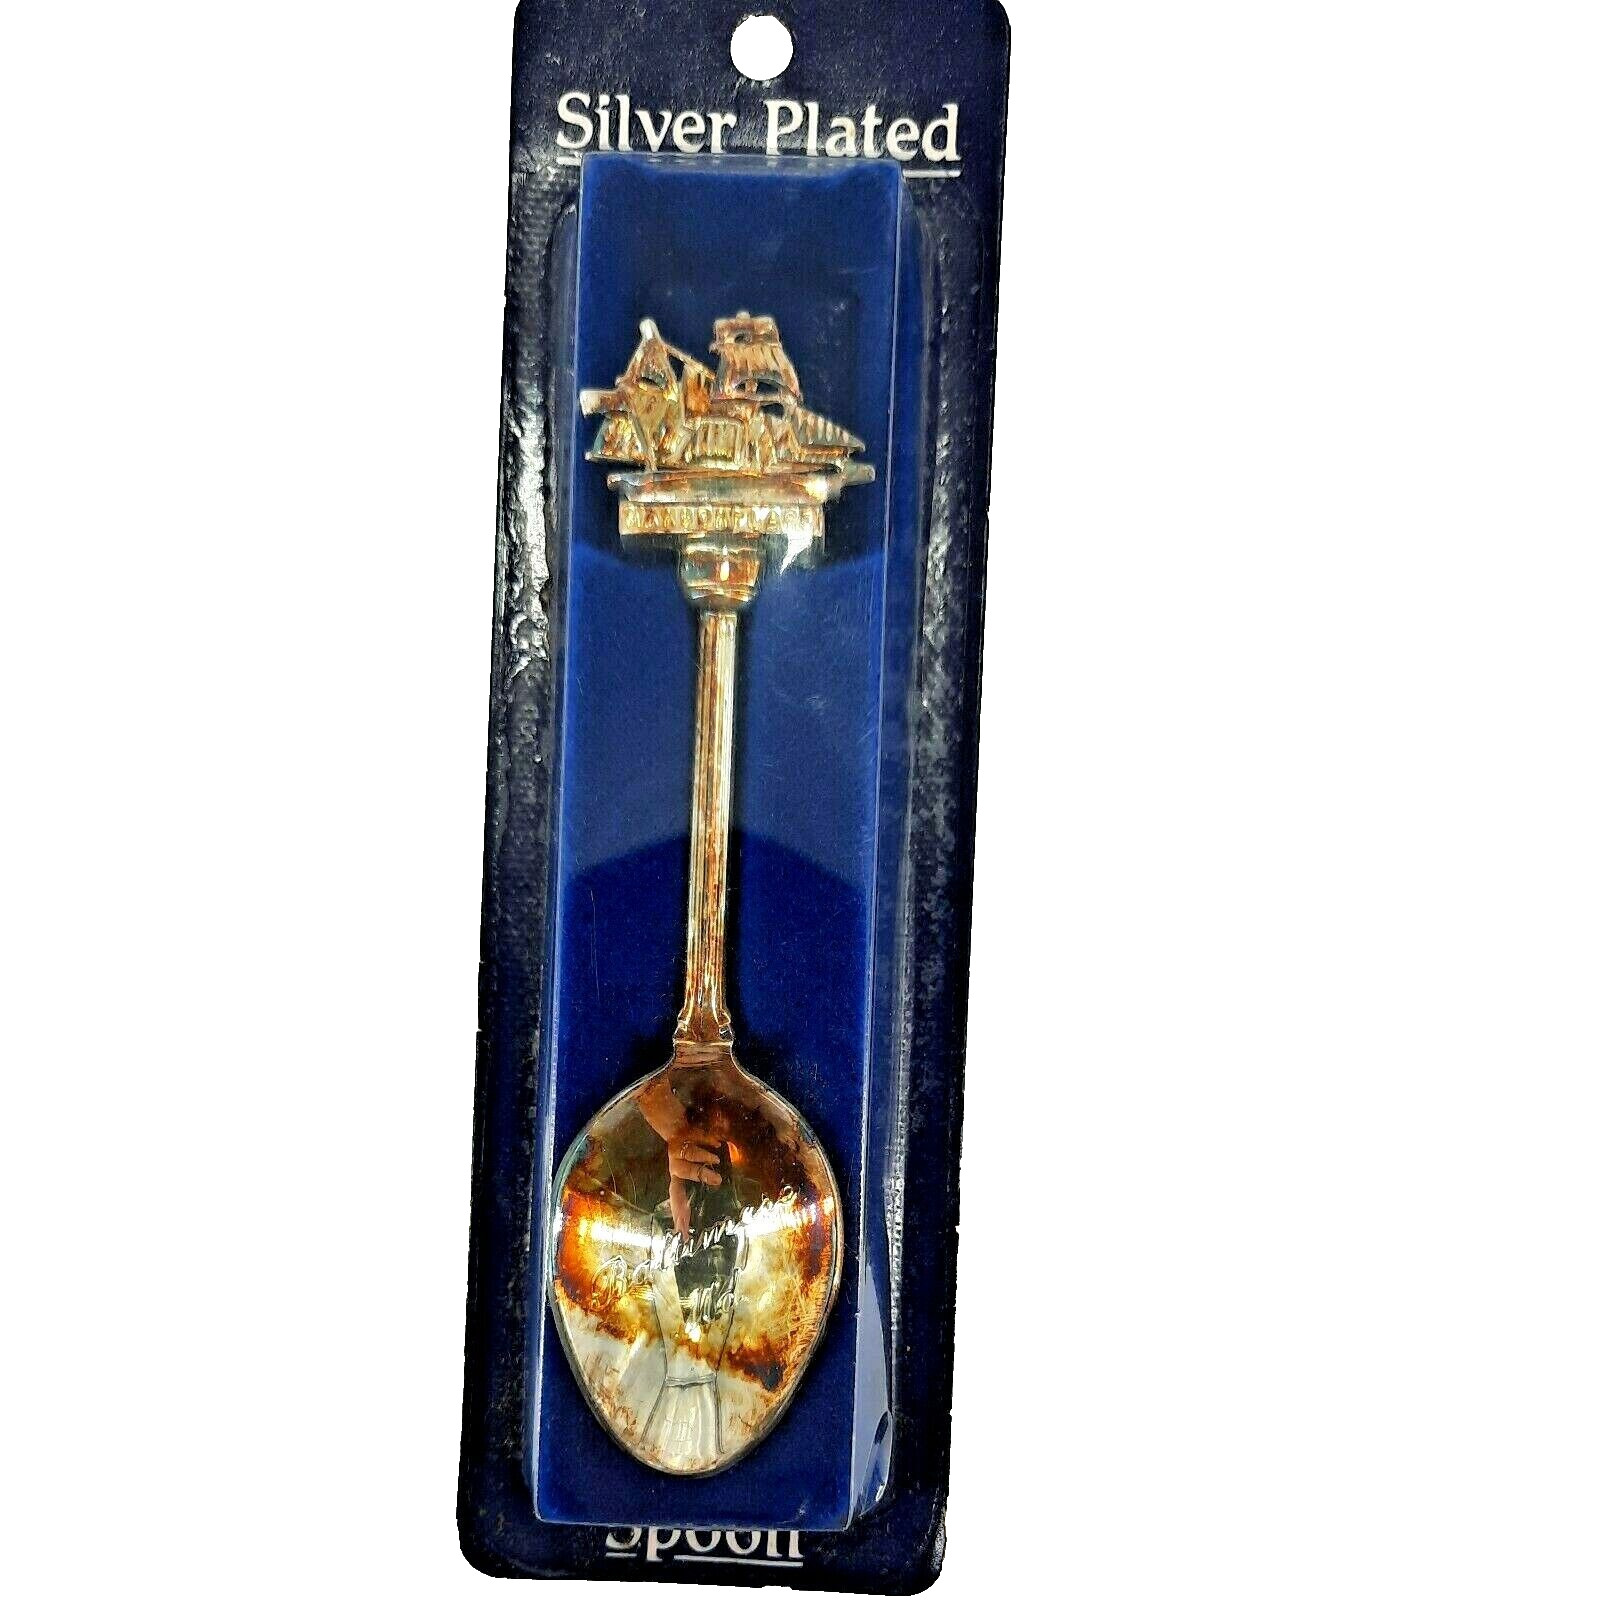 Vtg Baltimore MD 3D Ship Souvenir Spoon Harbor Place Silver Plated Sealed